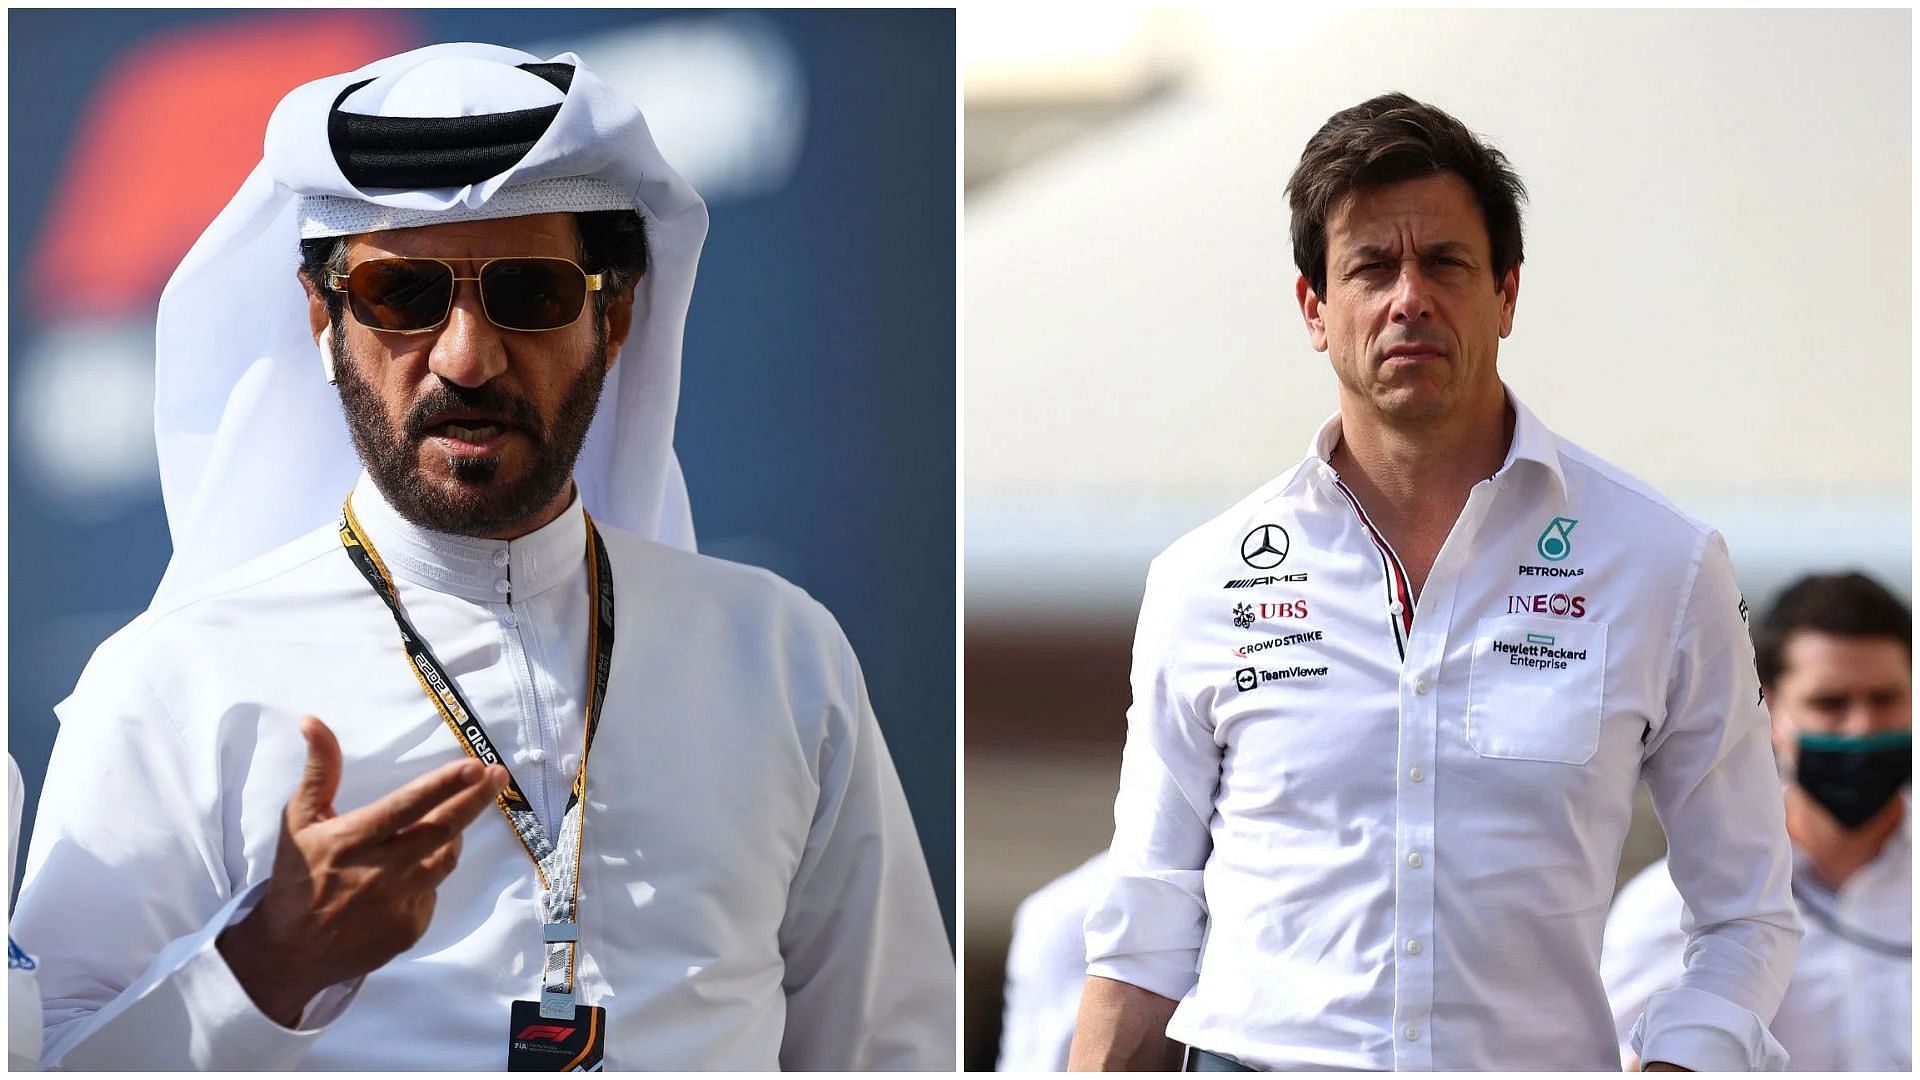 Mohammed Ben Sulayem (L) and Toto Wolff (R) (Collage via Sporskeeda)